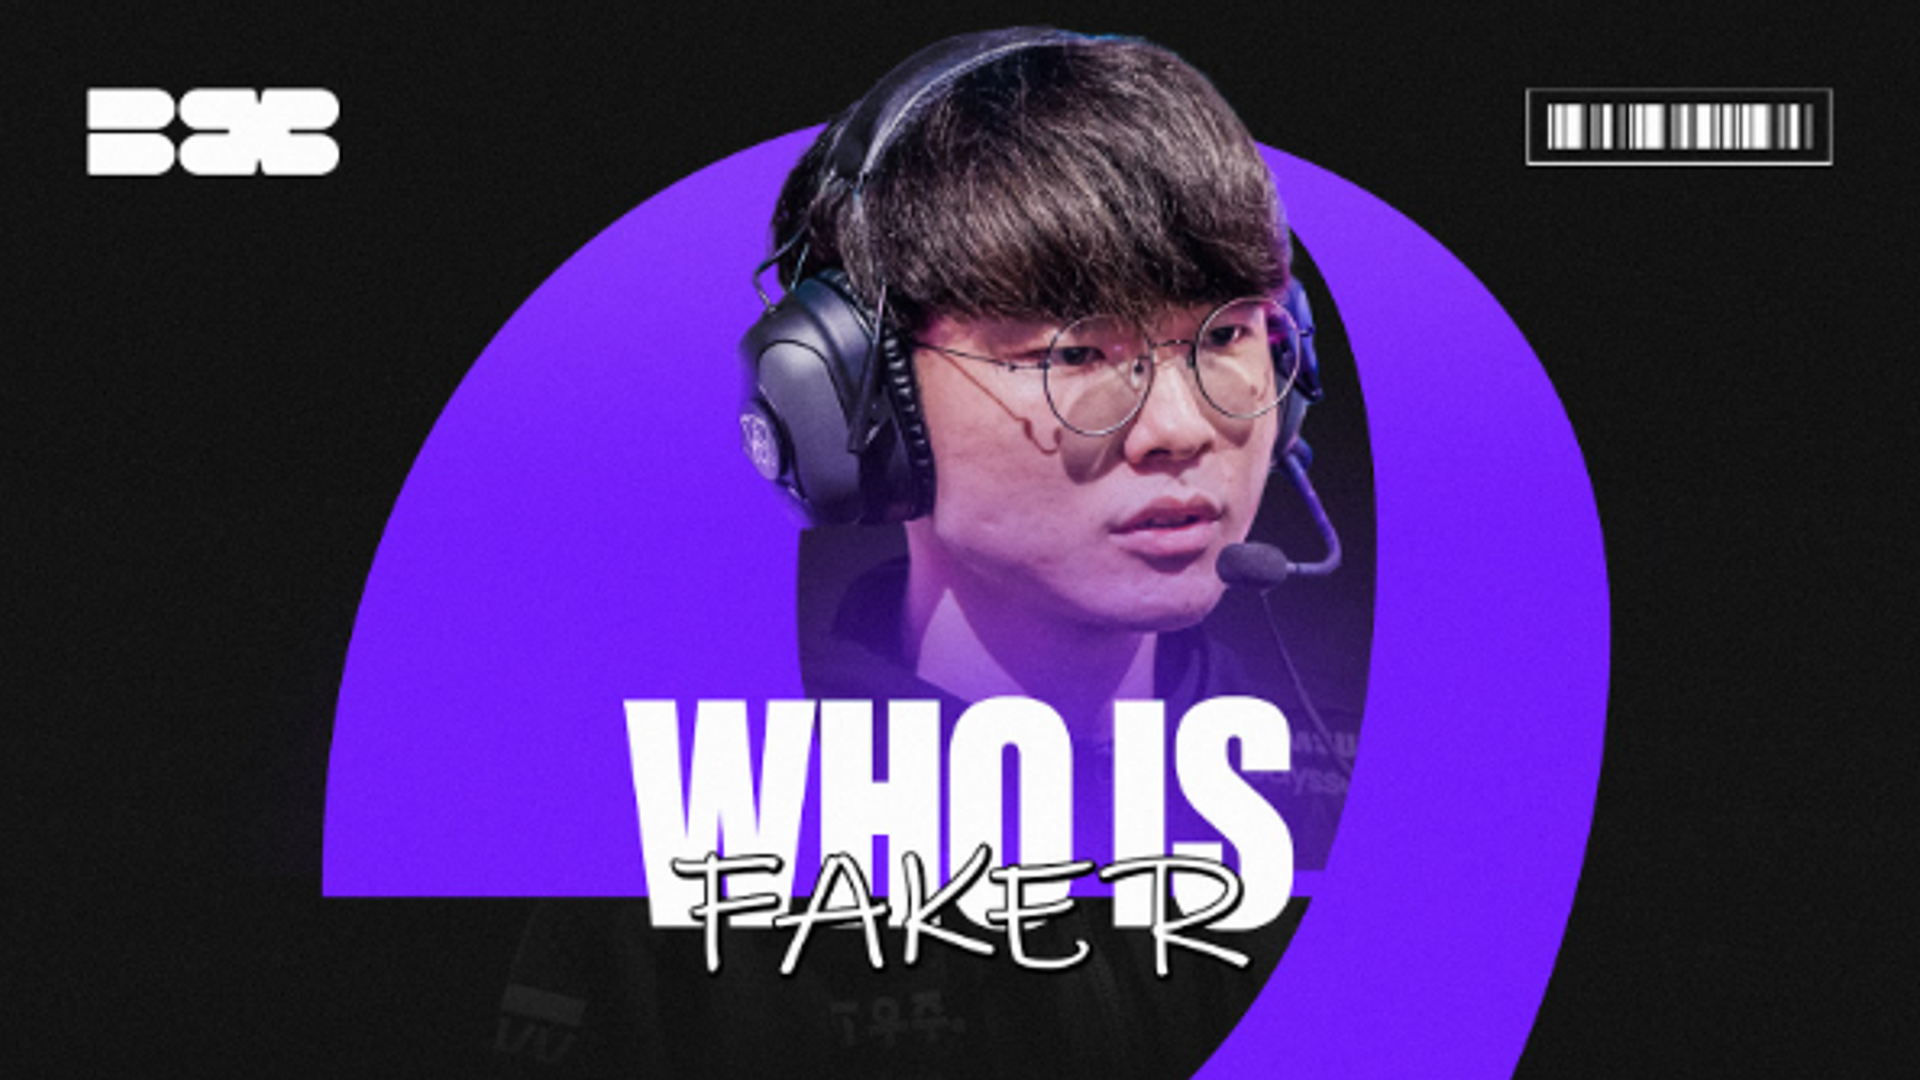 In The Moment: Lee 'Faker' Sang-hyeok LCK debut – video